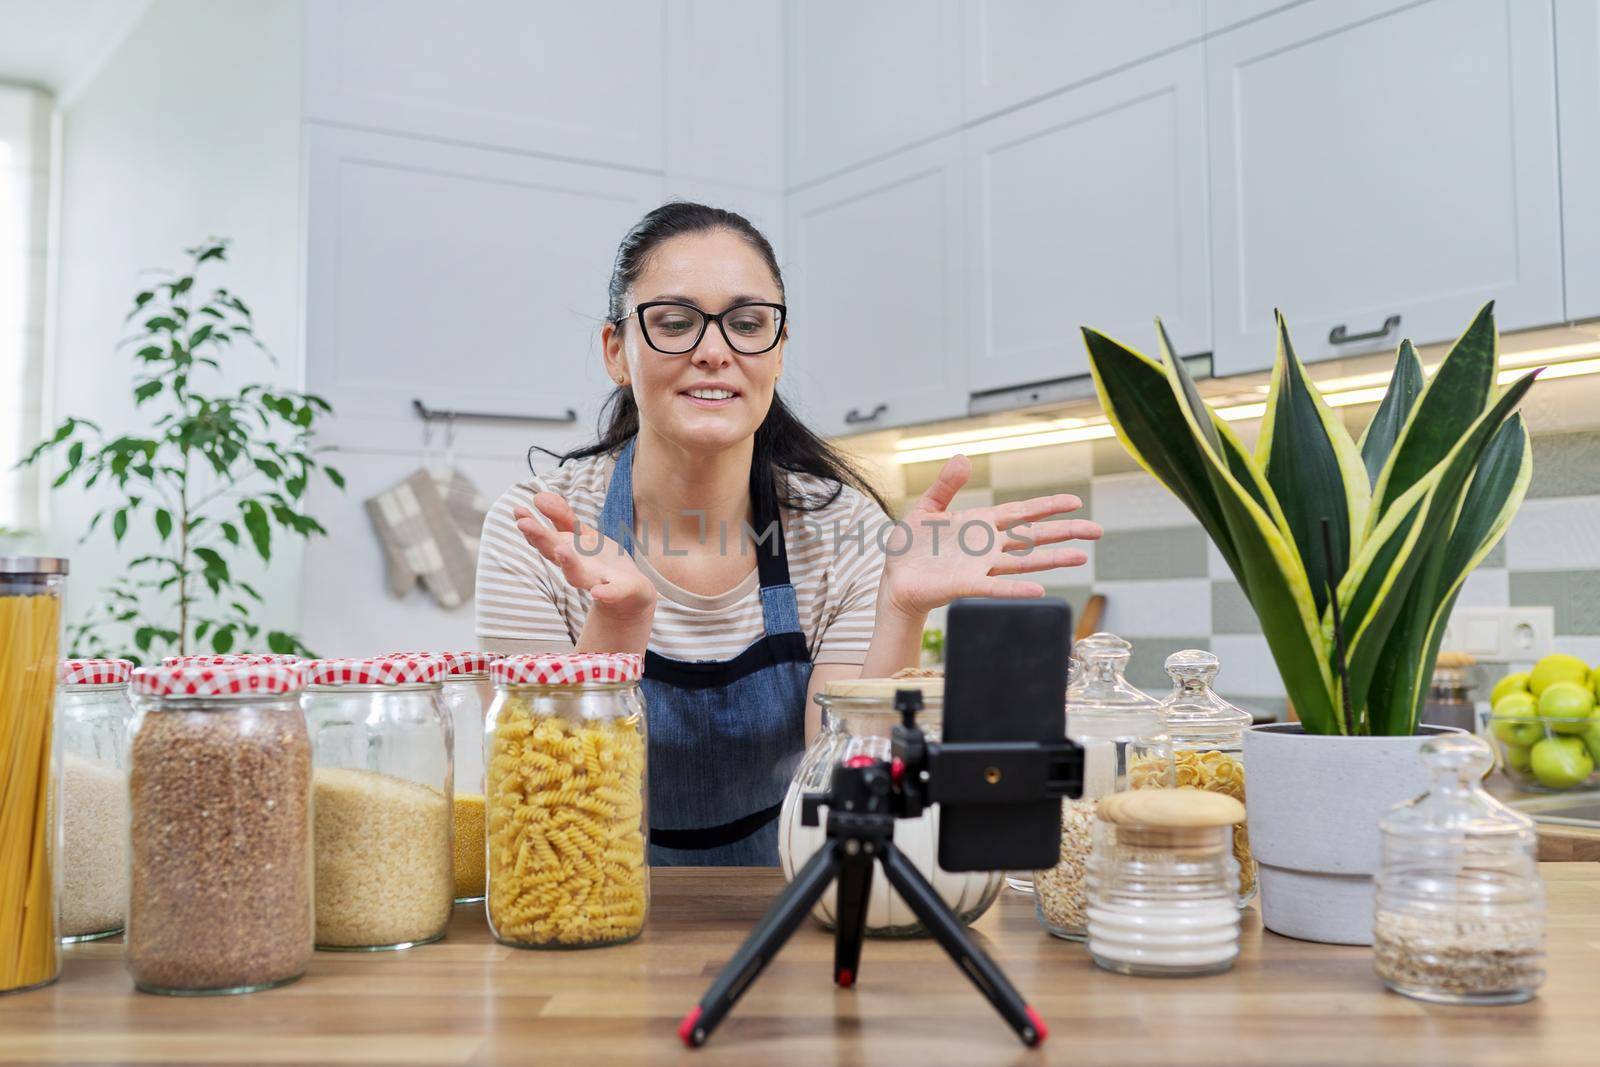 Online broadcast, blog about food, woman in an apron with jars of cereals by VH-studio